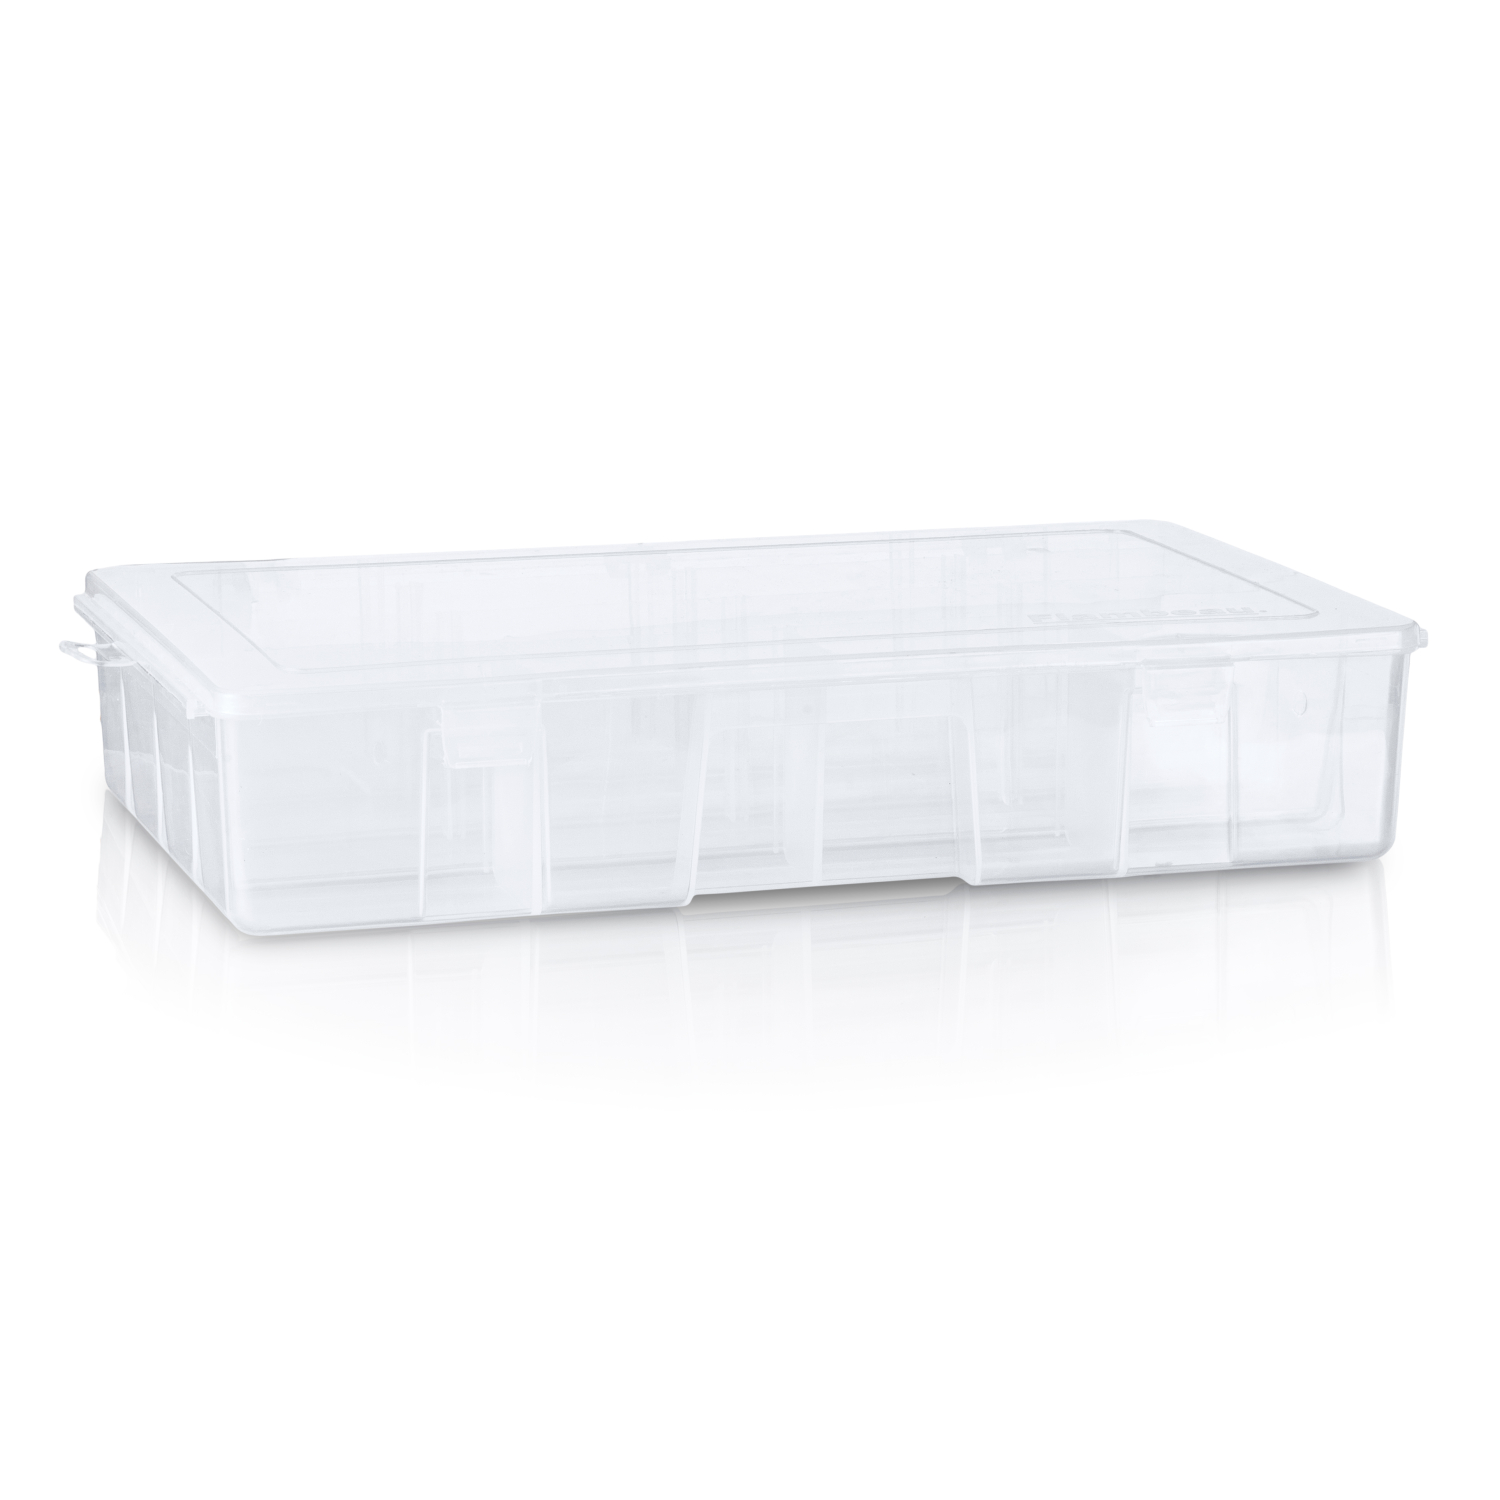 16 Compartments 9 Zerust Dividers - image 1 of 4